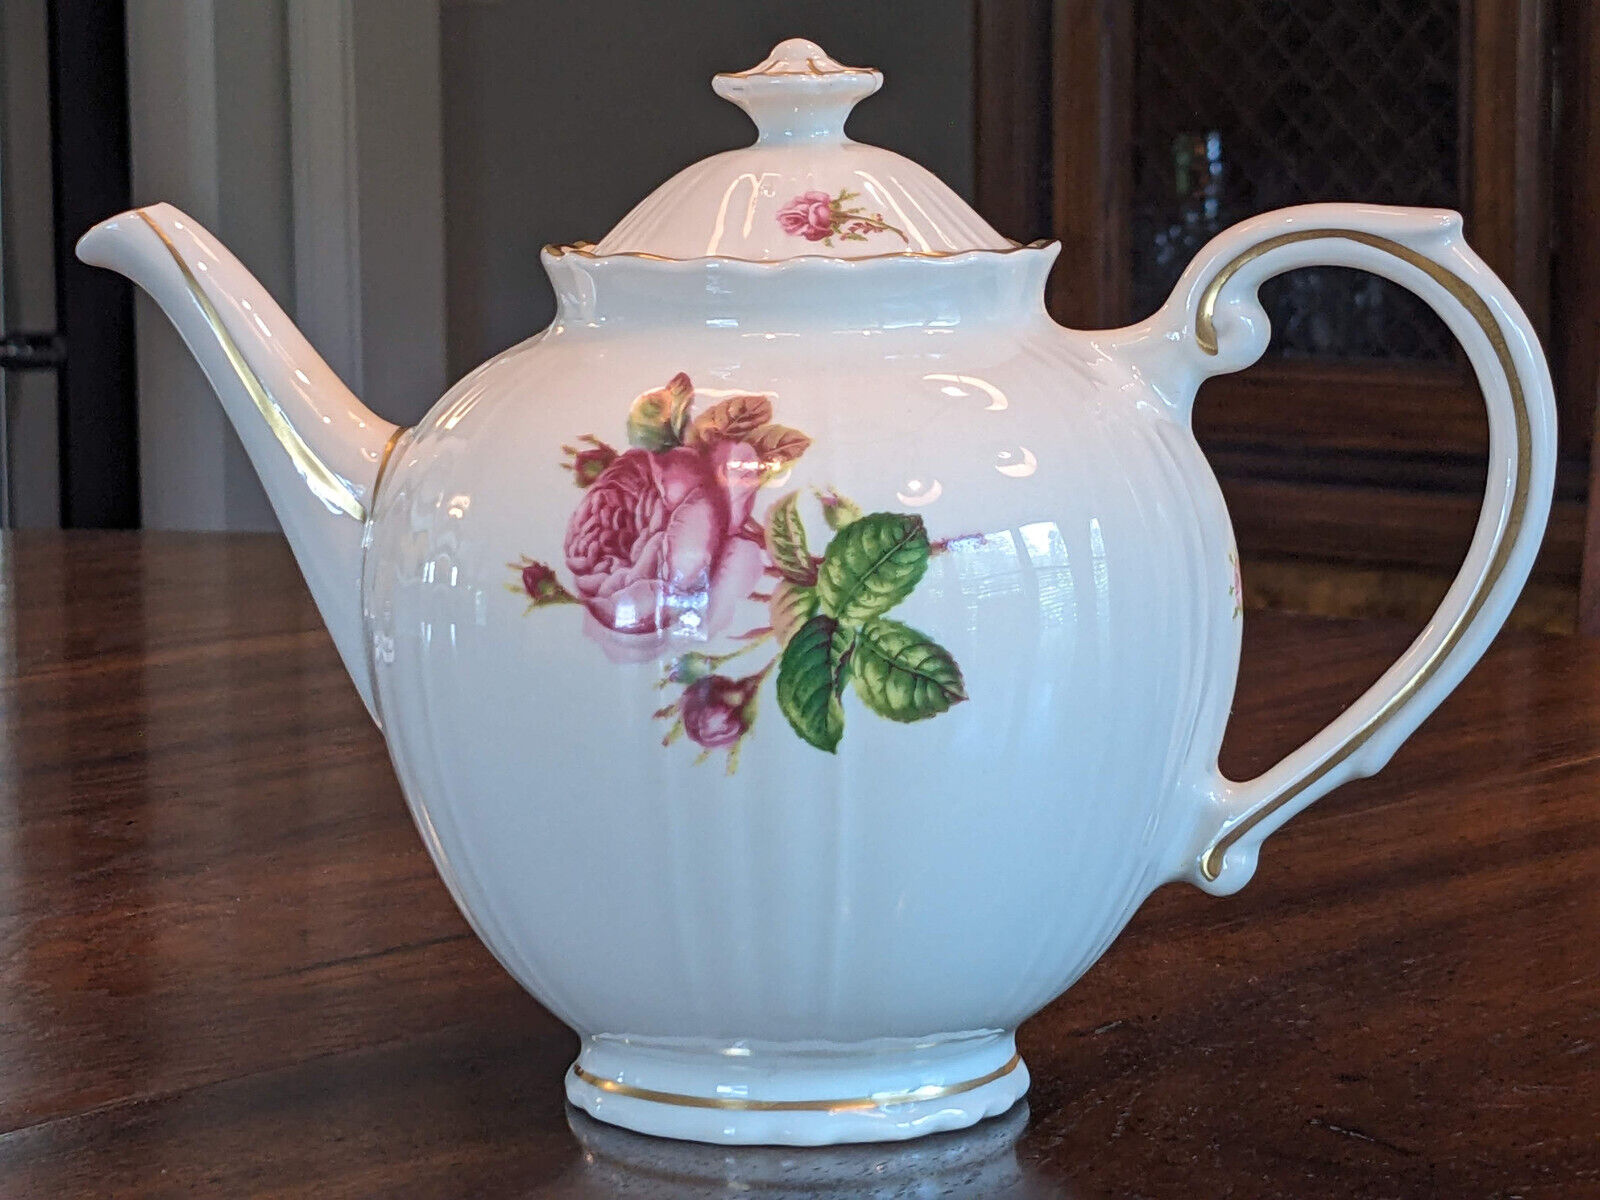 Vintage Syracuse China Federal Teapot, Victoria Pattern, Pink Roses & Gold Trim